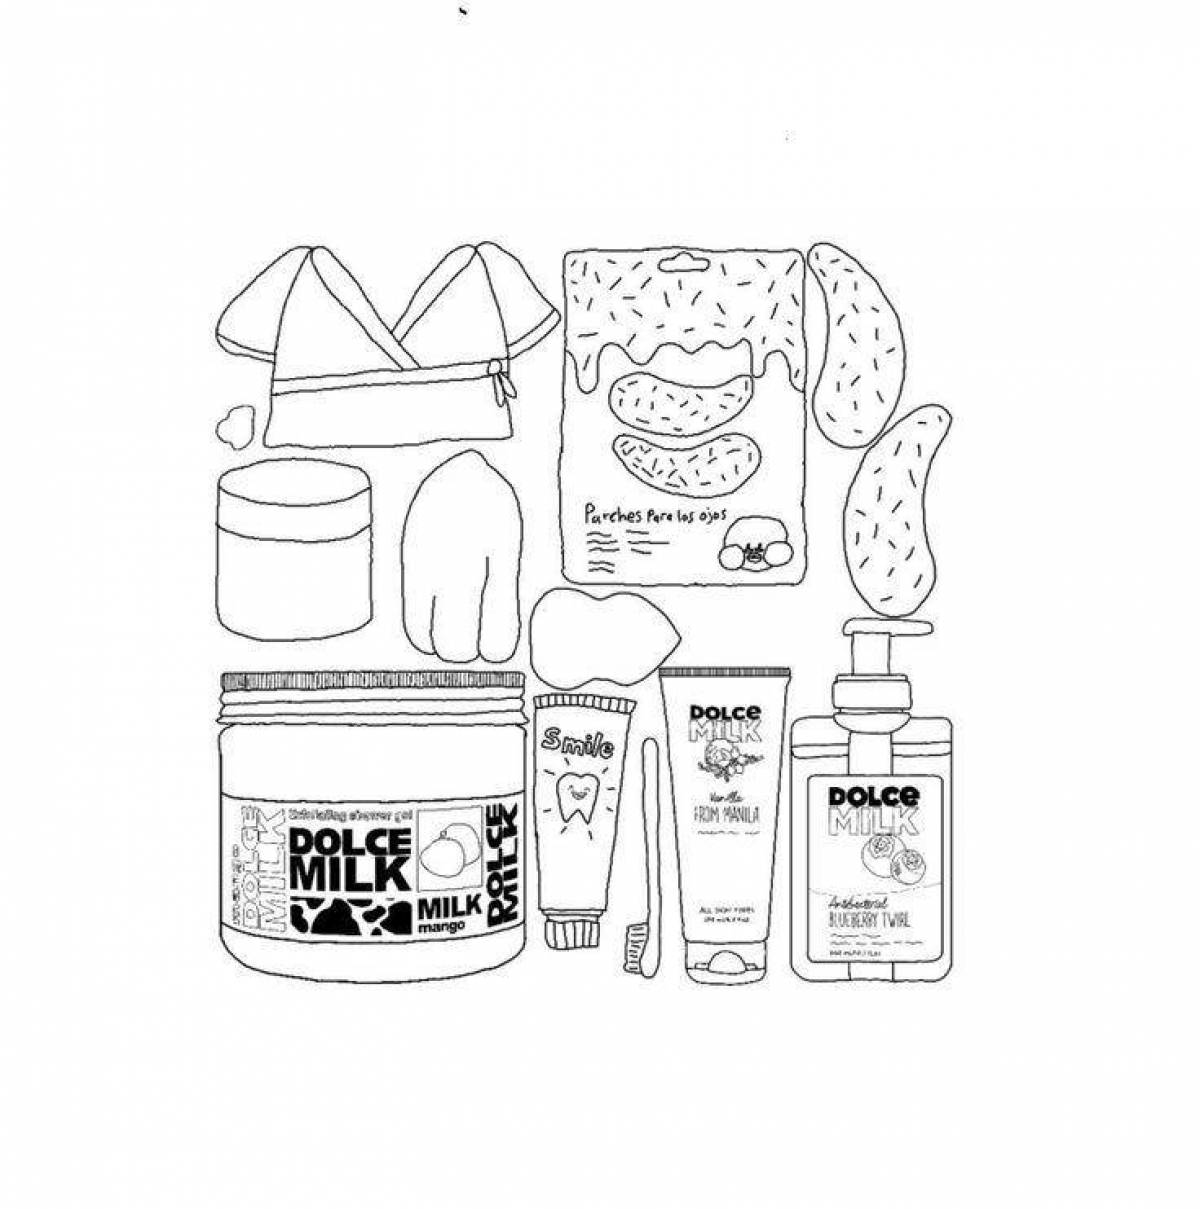 Dolce milk lipstick coloring page